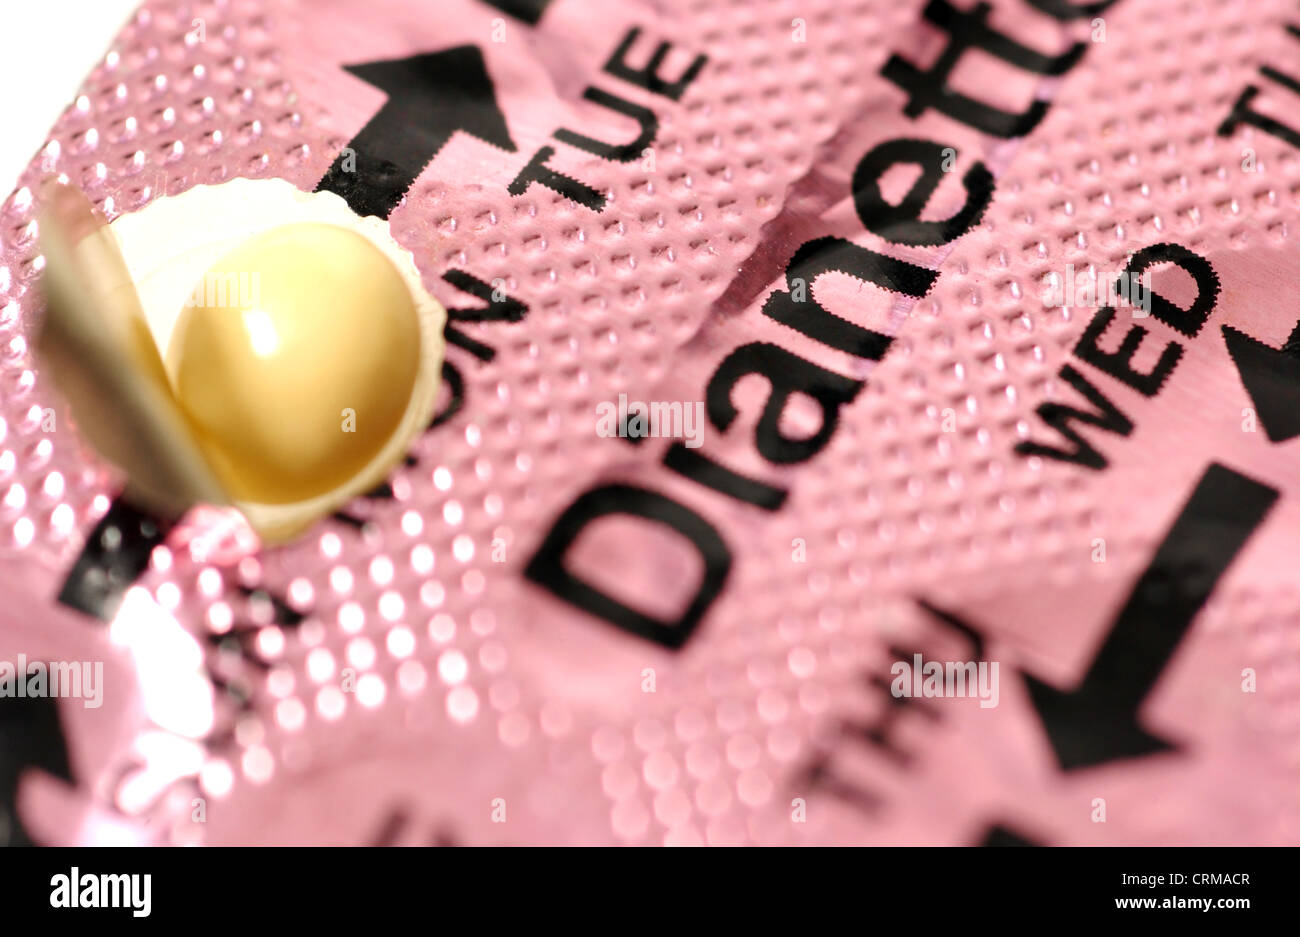 Pack of the contraceptive pill Stock Photo